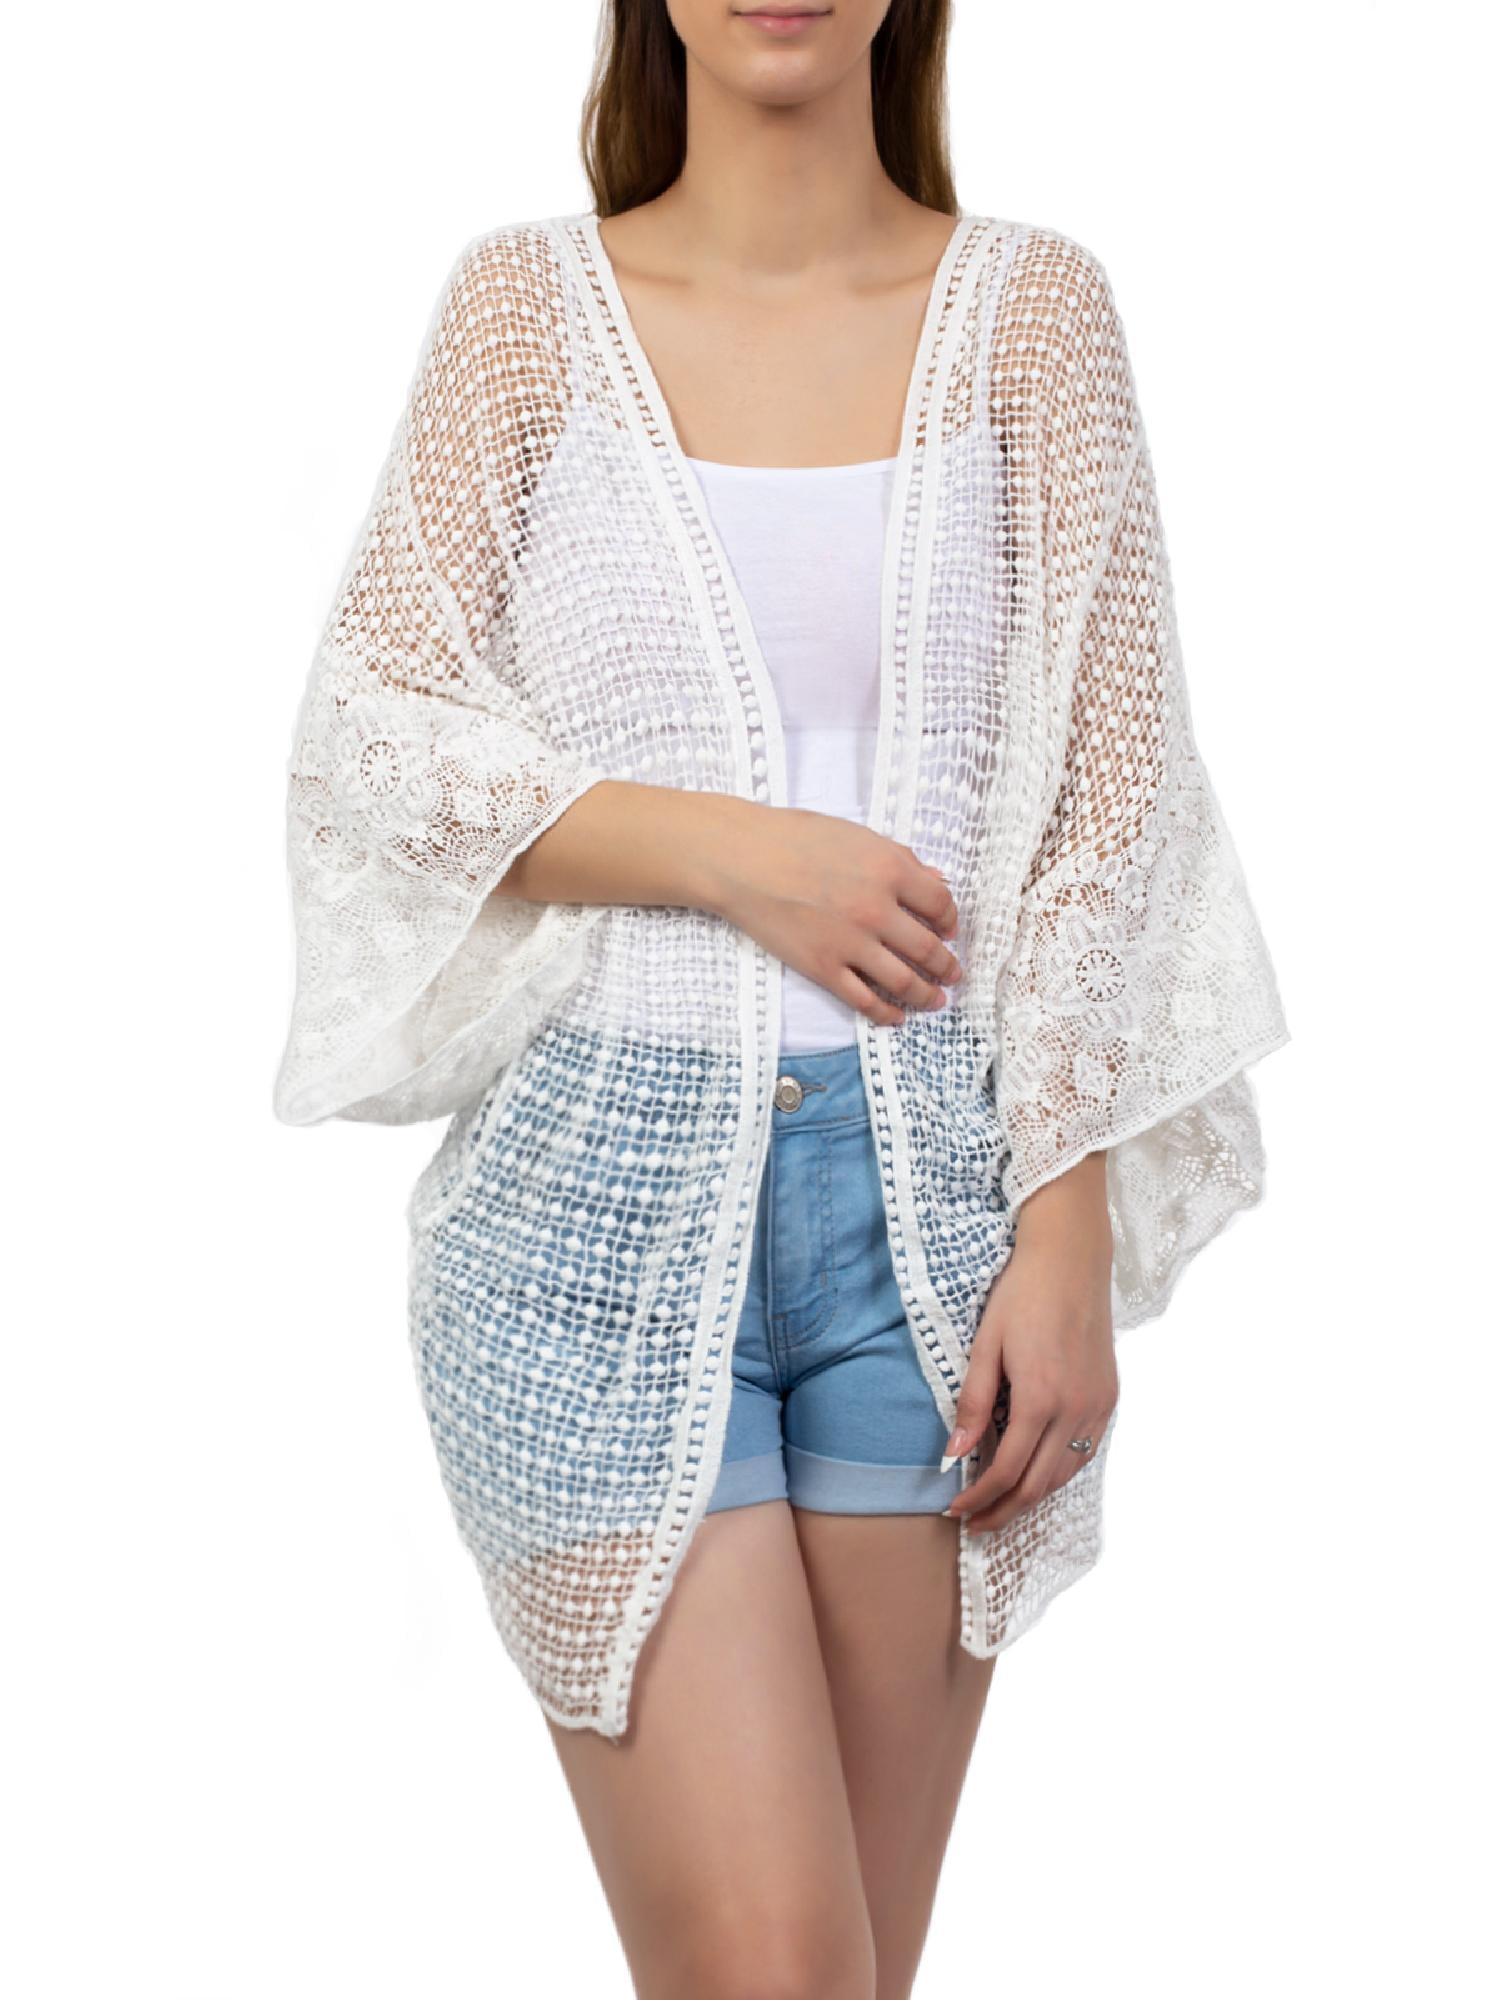 Cotton cardigan sweater for women Summer lace knit jacket with buttons Chunky oversized kimono in milky white Loose hand knit blouse M-L